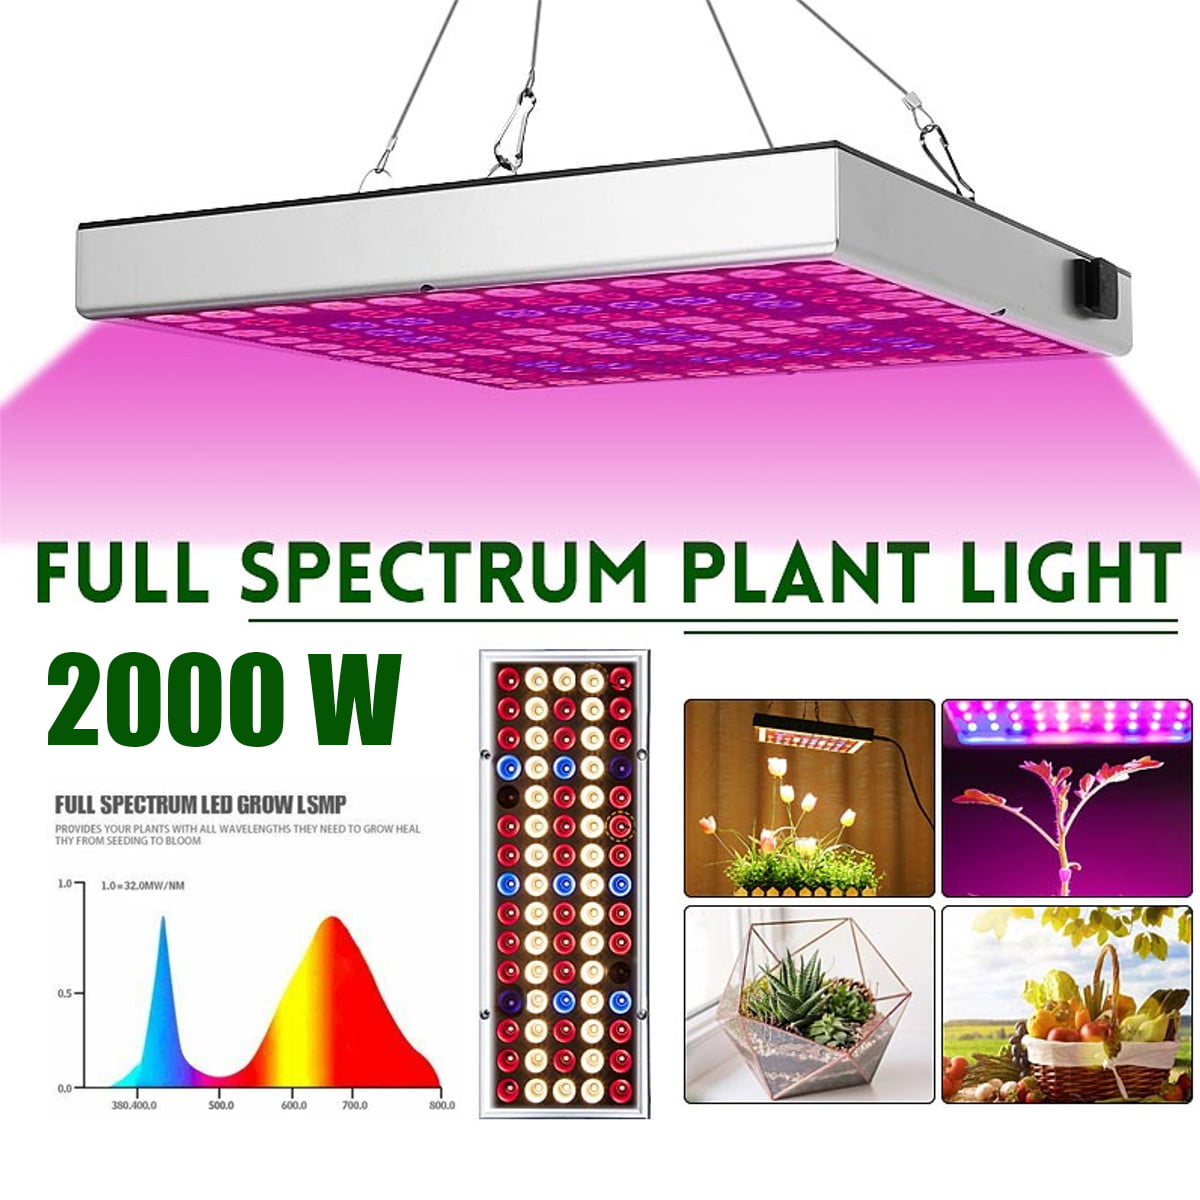 Details about   2000W LED Grow Light Full Spectrum Growing Lamp For Hydroponic Indoor Plant NEW 